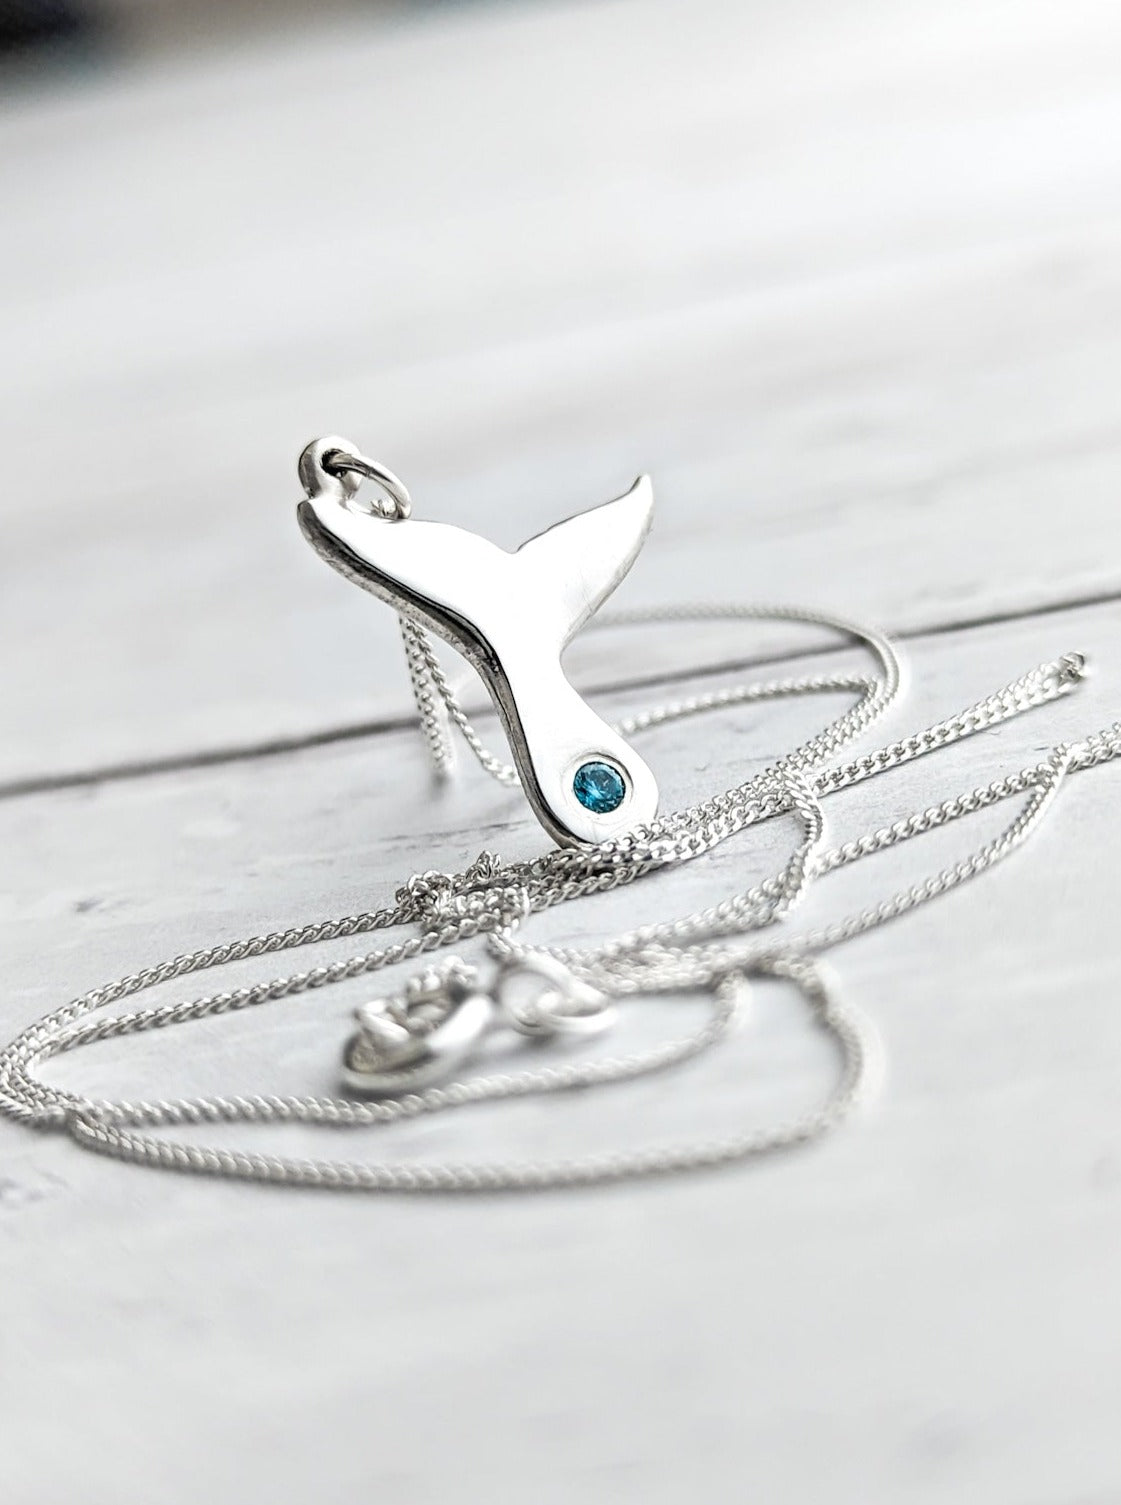 Whale tail necklace with vibrant blue birthstone